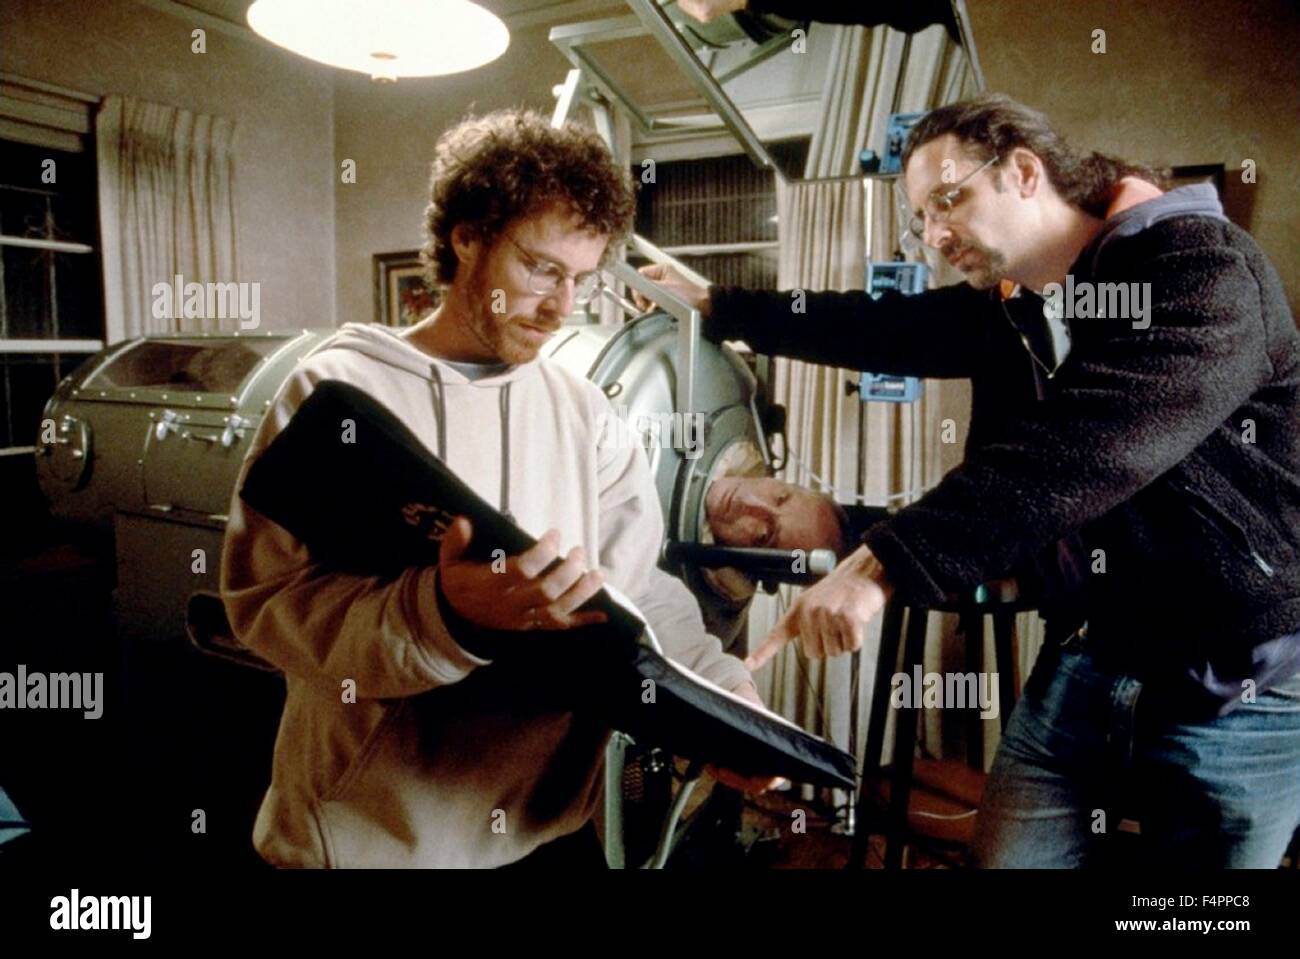 On the set, Ethan and Joel Coen / The Big Lebowski (1998) / 1997 directed by Coen Brothers [Polygram Filmed Entertainment ] Stock Photo